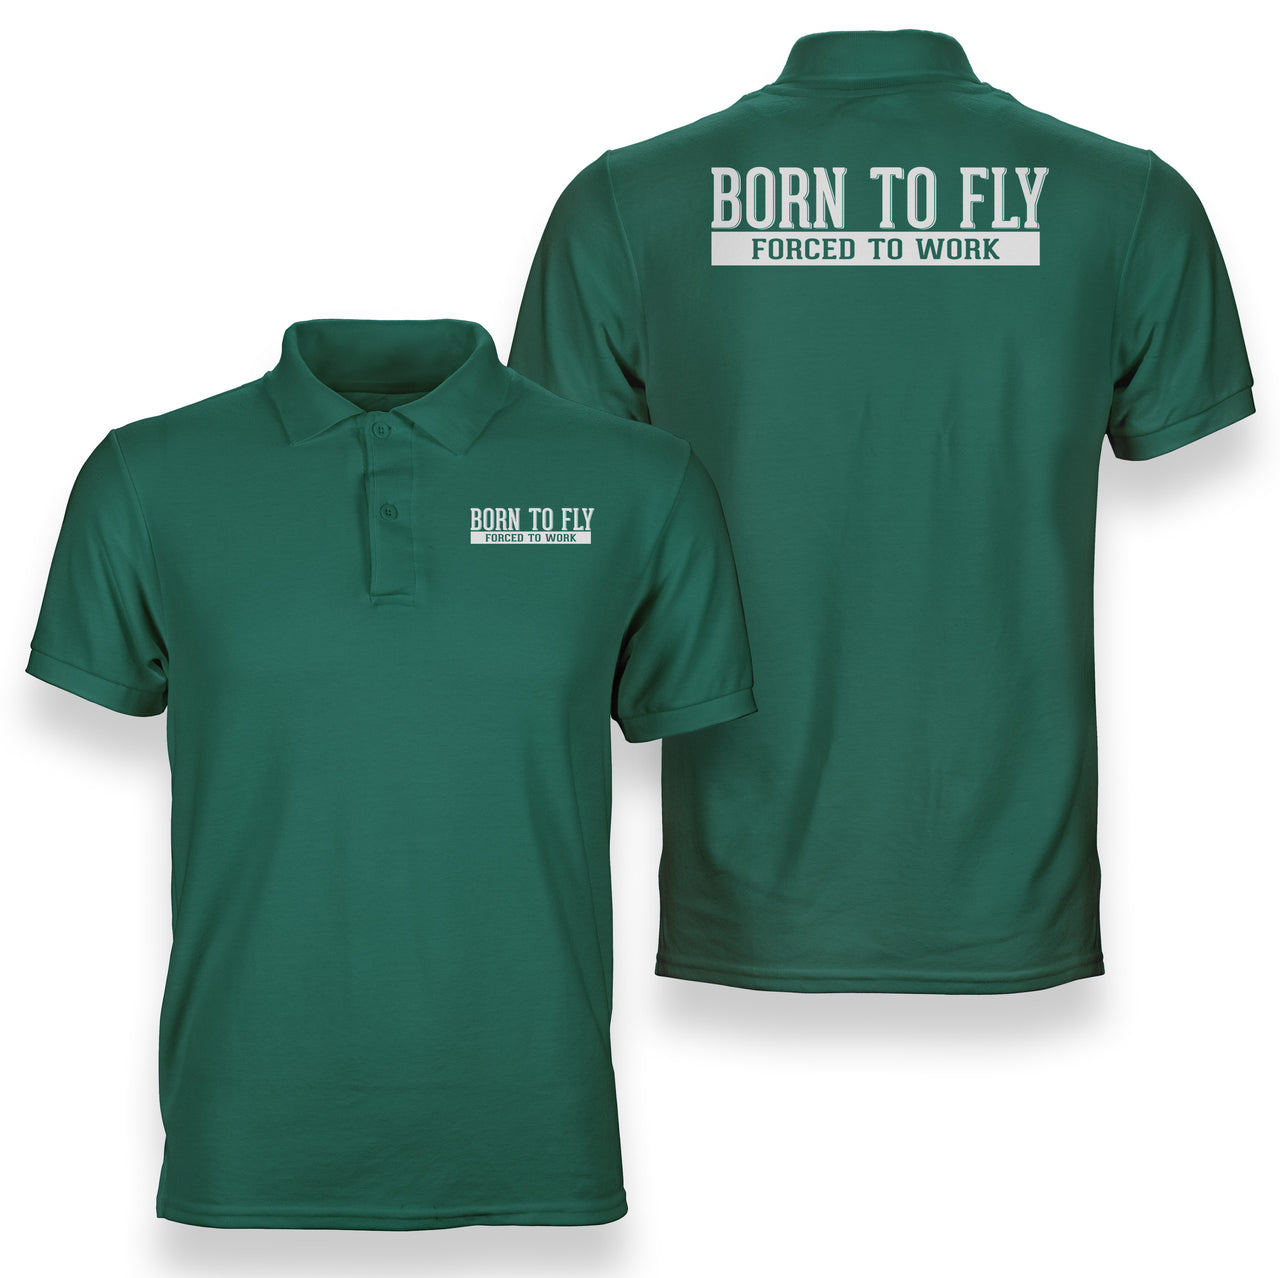 Born To Fly Forced To Work Designed Double Side Polo T-Shirts